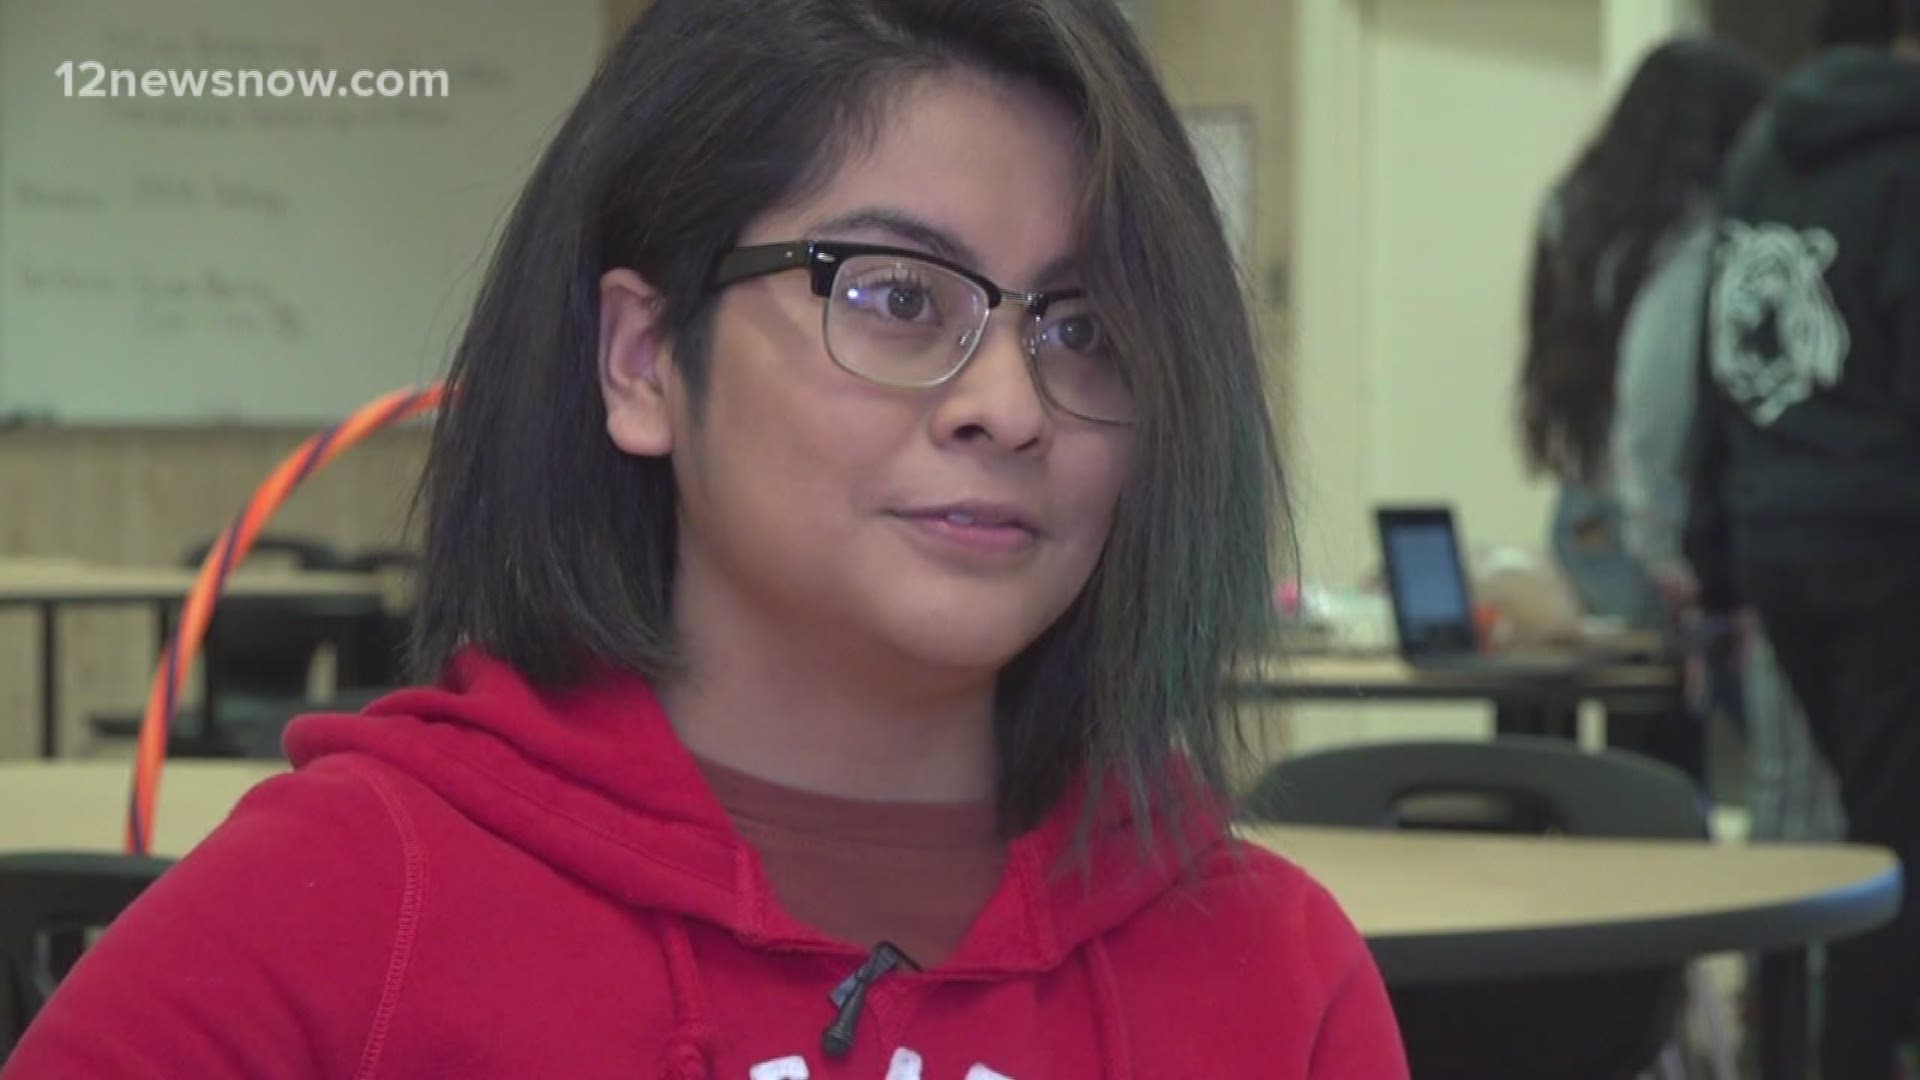 Lizbeth Trujillo and her teacher are working to break down walls and show young women that they can do it.